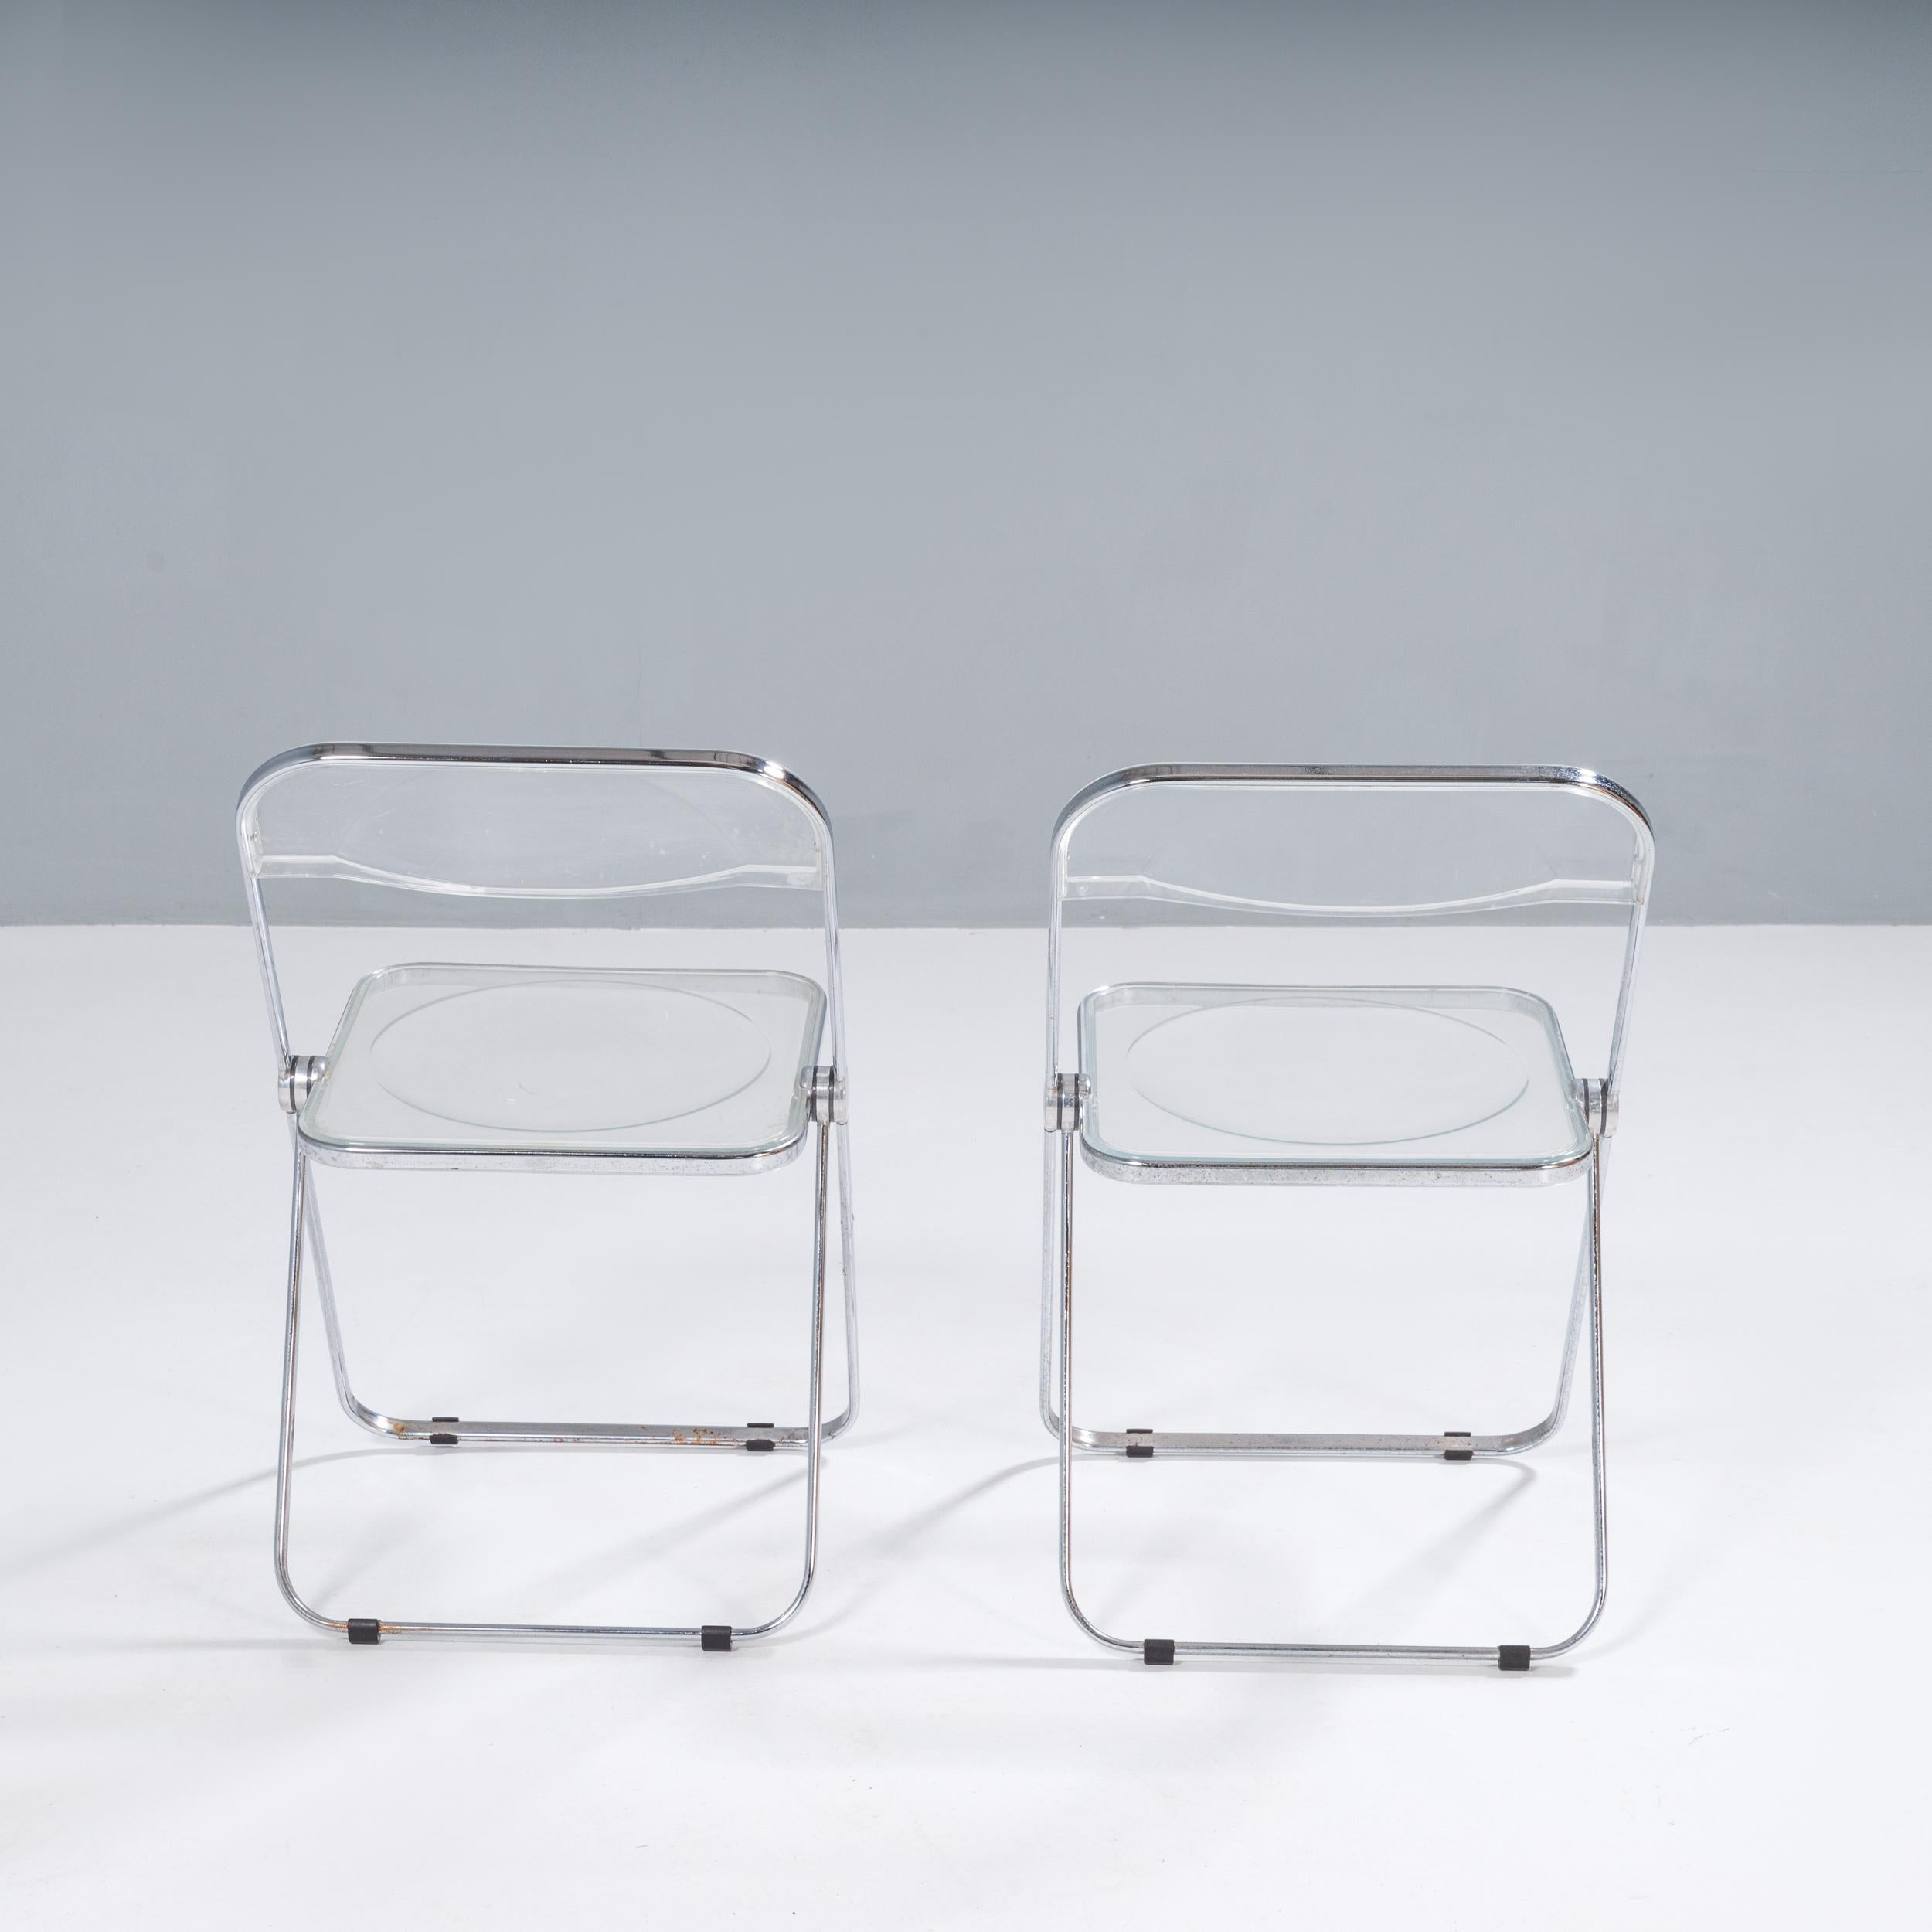 Italian Giancarlo Piretti for Castelli Plia Plastic Dining Chairs, Set of 2 In Good Condition For Sale In London, GB